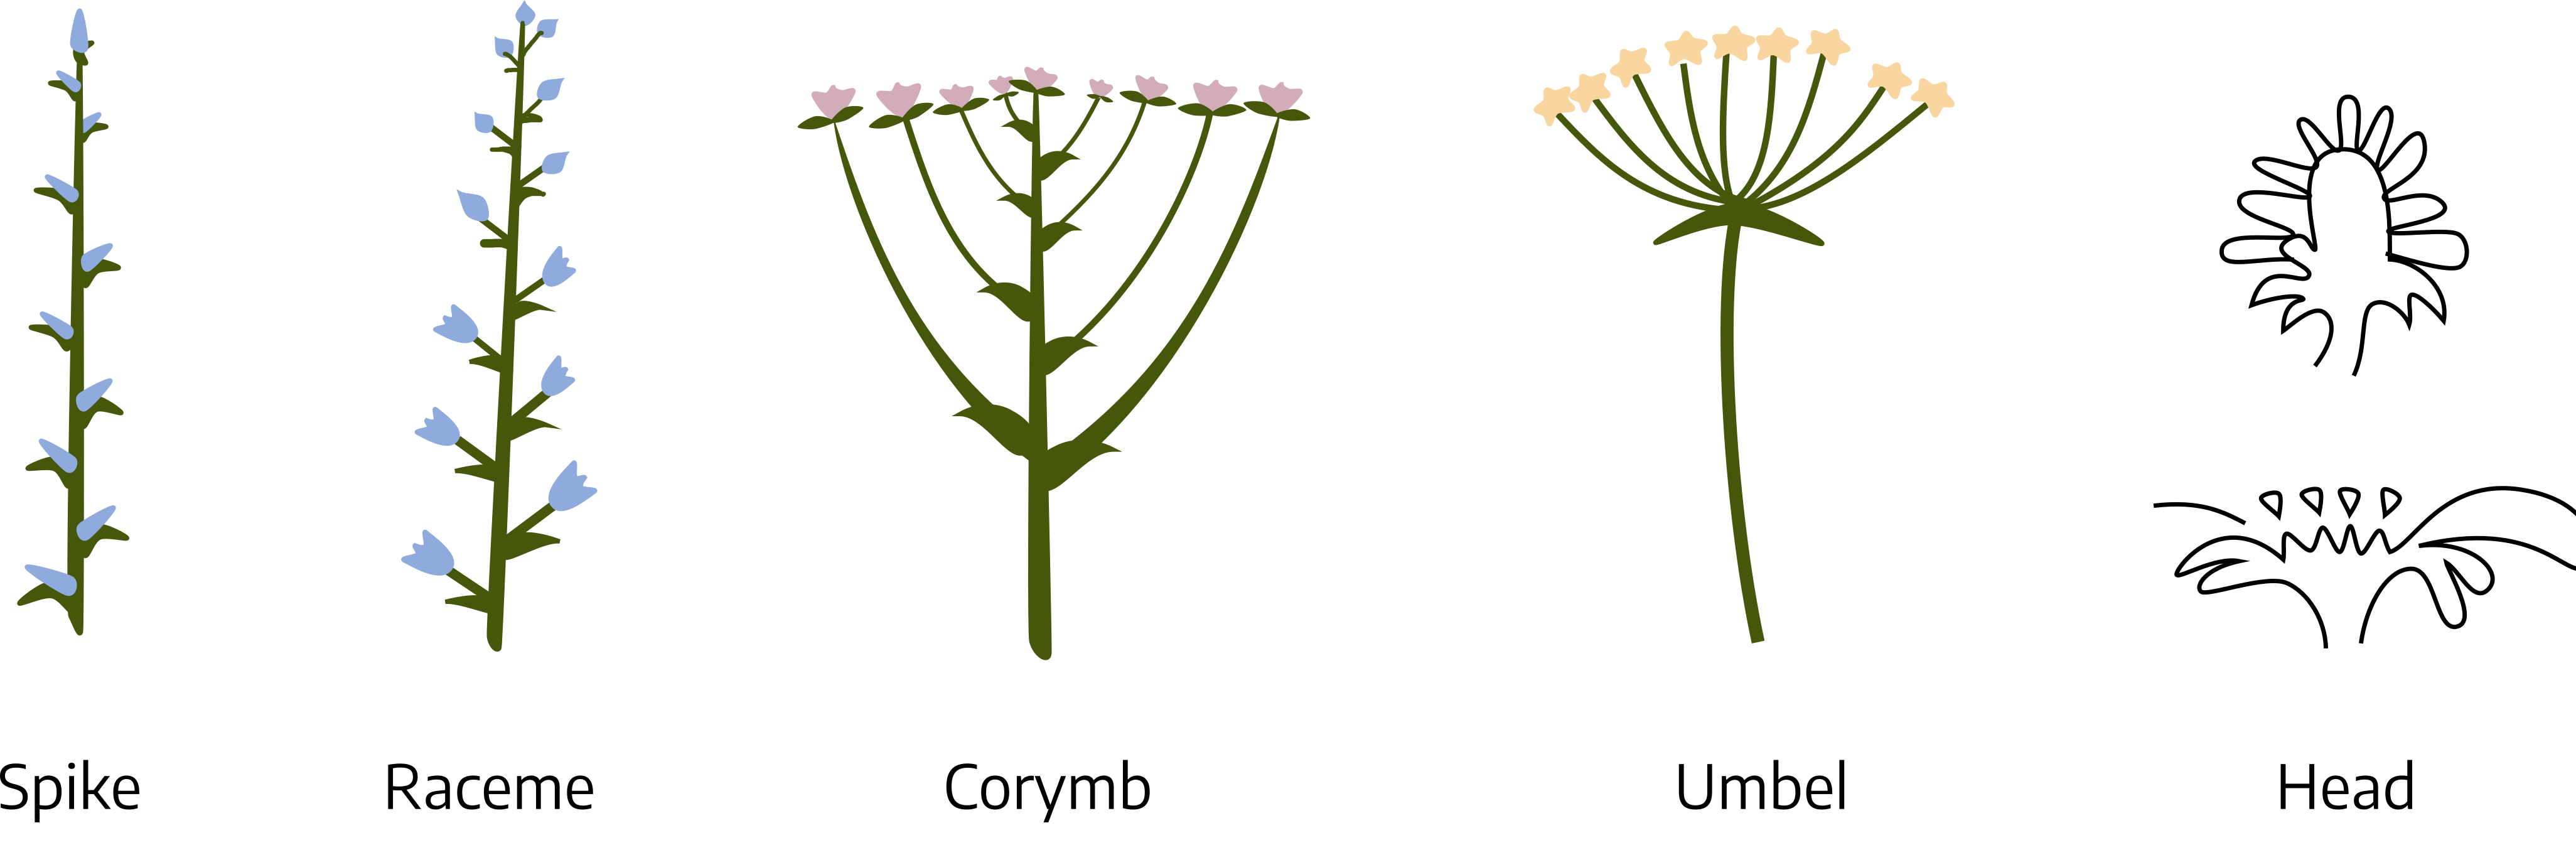 An image showing five types of inflorescences.The first is a long stalk with alternating buds growing directly on the stem, spike. The second is a long stem with alternating flowers growing along the stem, raceme. The third is a long stalk with alternating flowers growing along the stem, shaping a round flat top, corymb. The fourth is a long stalk with the buds growing at random from the top of the stem, umbel. The fifth is the petals and flowers grow from the head of the plant, like most flowers, head.